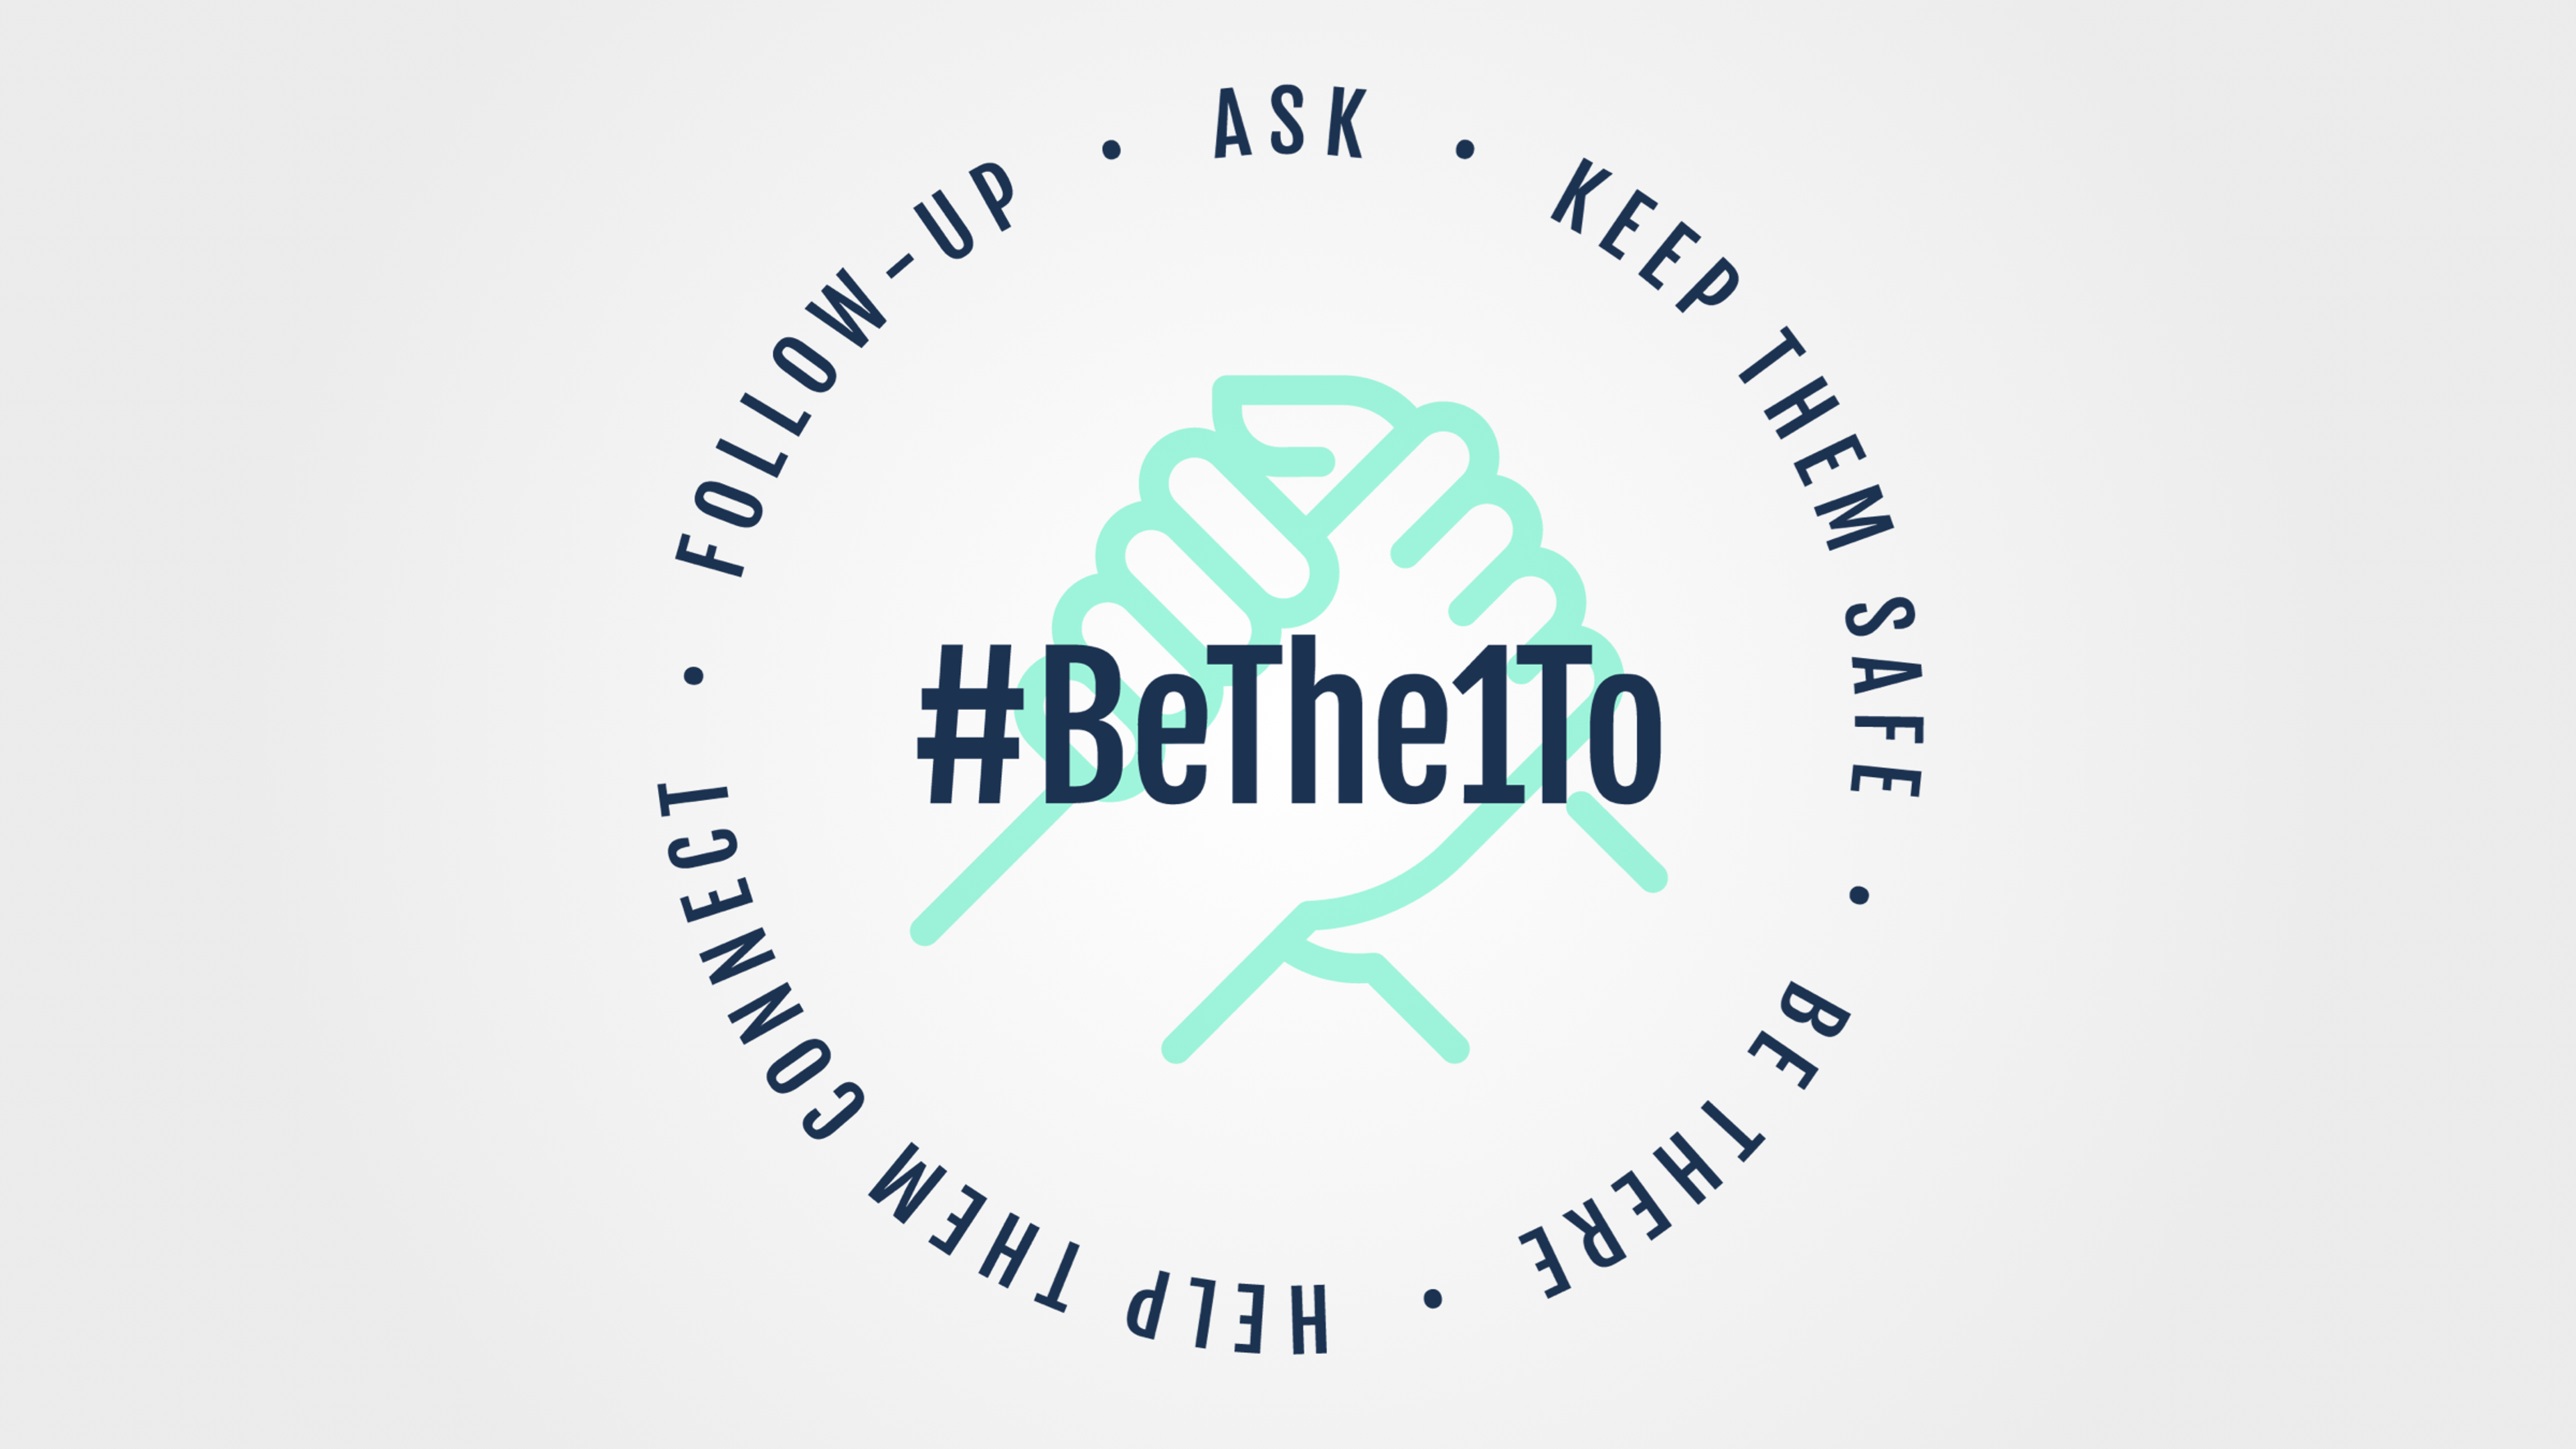 BeThe1To Logo: Follow-up, ask, keep them safe, be there, and help them connect around a #BeThe1To word mark overlaid on a handshake